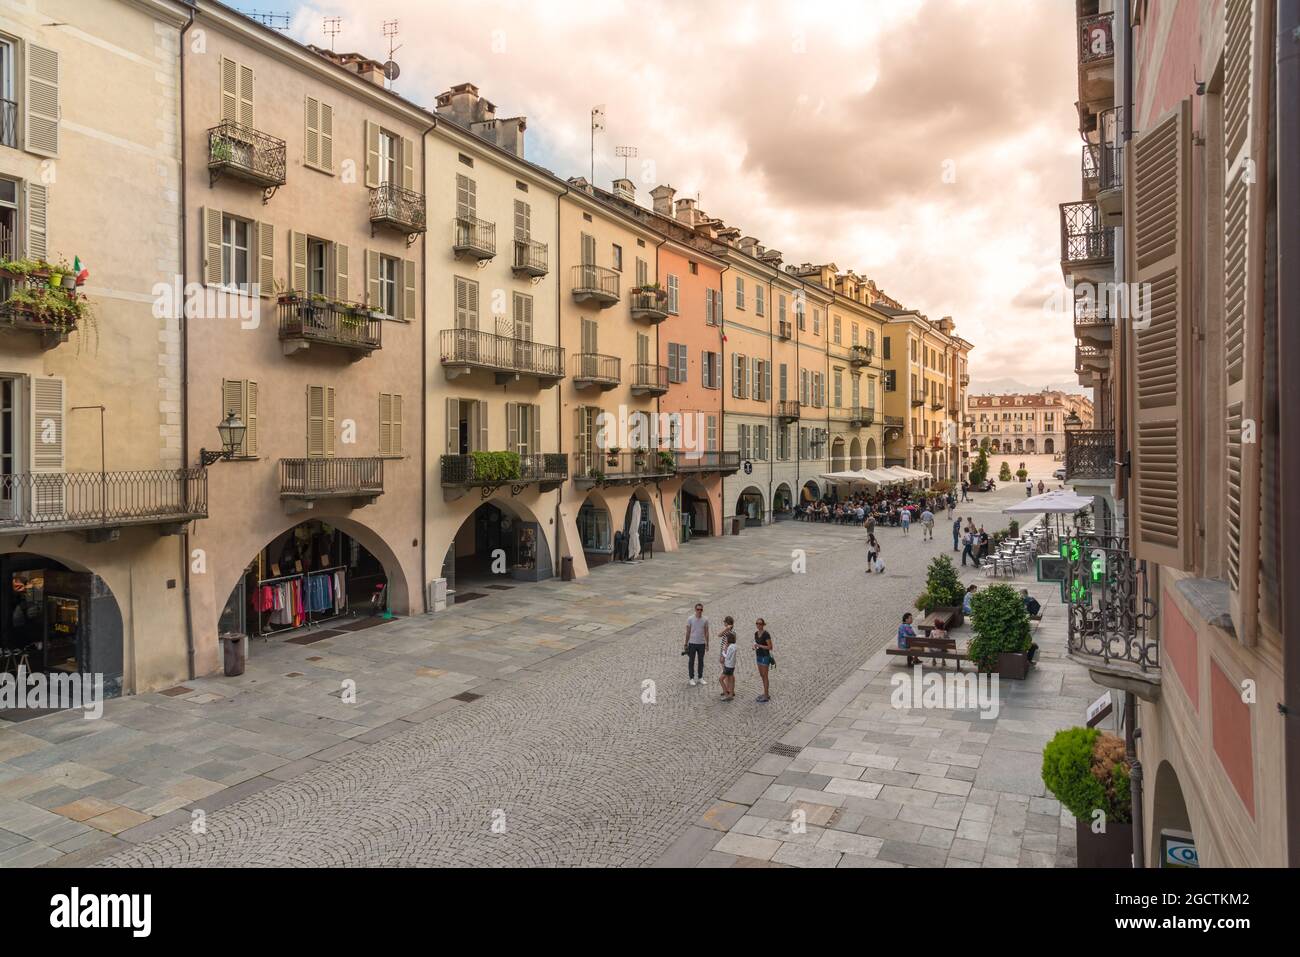 CUNEO, PIEDMONT, ITALY - AUGUST 2, 2021: Via Roma at sunset with historic colorful buildings with arcades (portici of Cuneo), Galimberti square in the Stock Photo